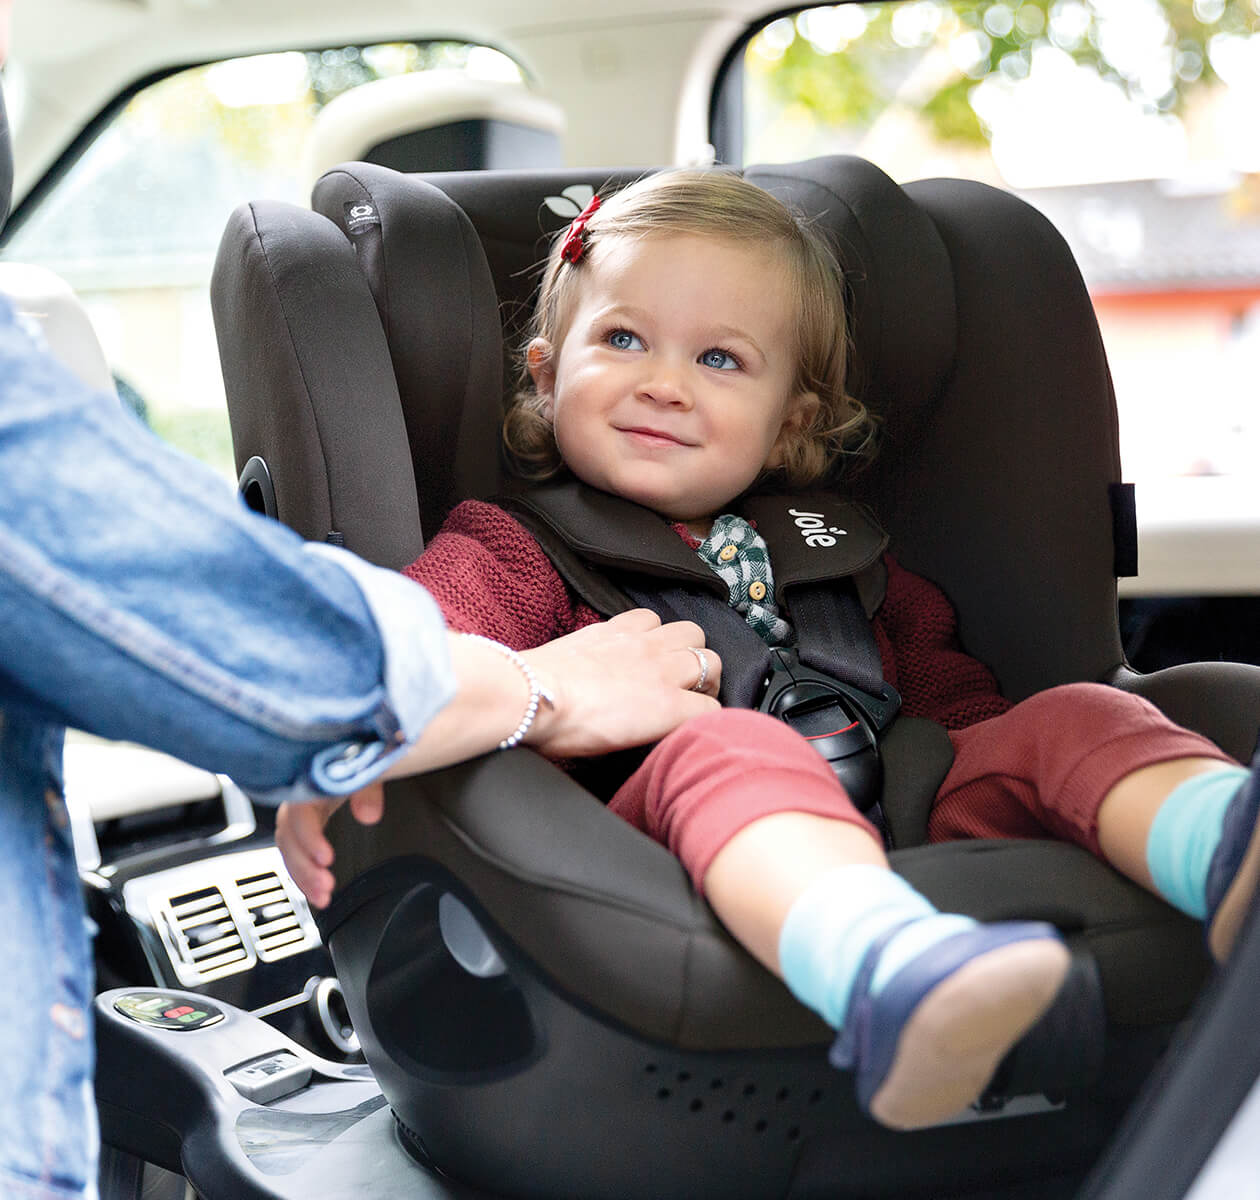 Joie i-Spin 360 i-Size Spinning Car Seat